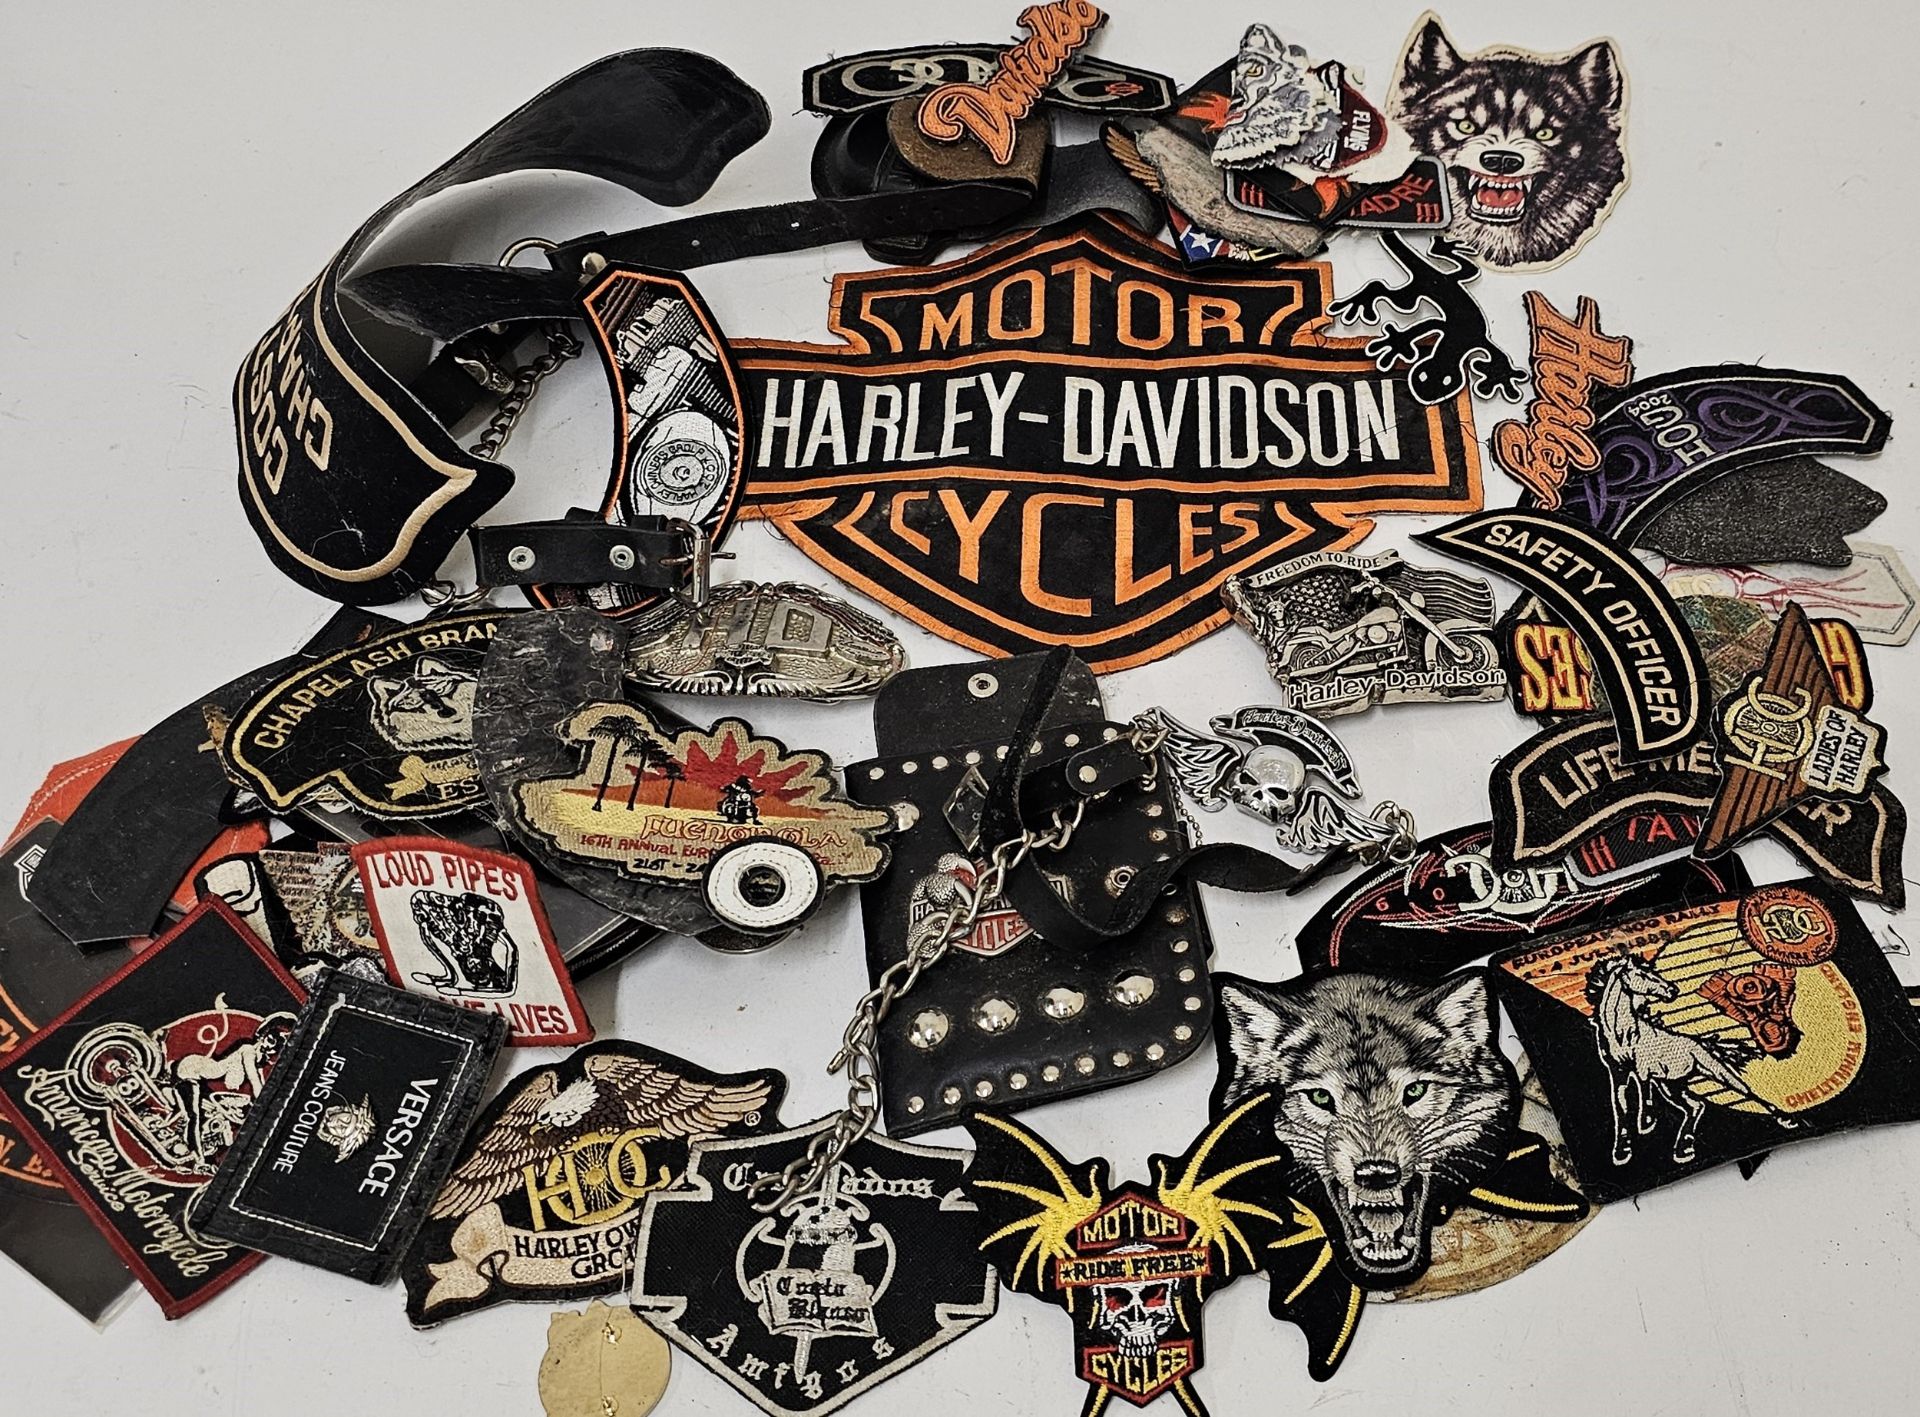 A collection of Harley Davidson ephemera, including two belt buckles a wallet and patches.